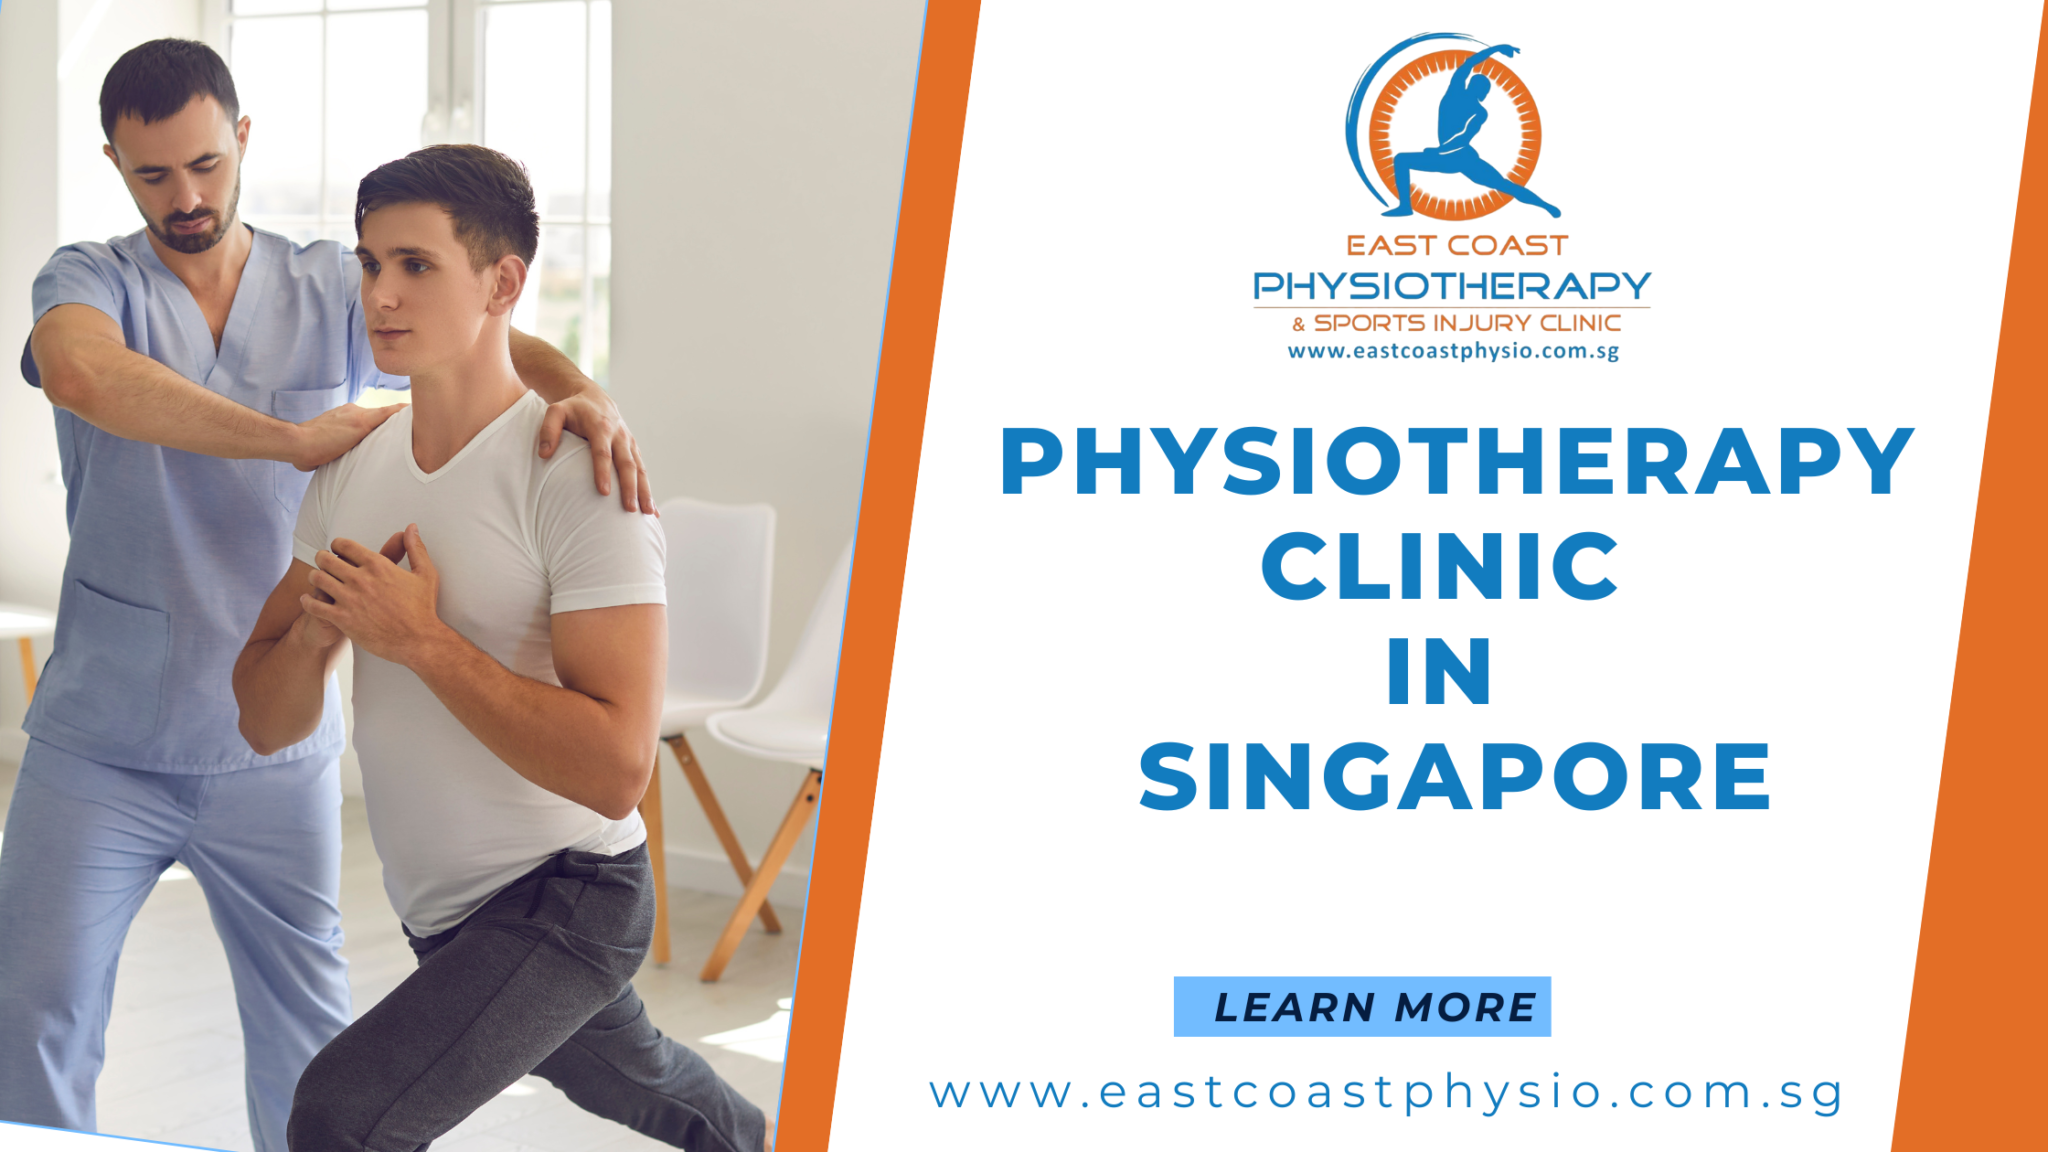 PHYSIOTHERAPY CLINIC IN SINGAPORE - East Coast Physiotherapy